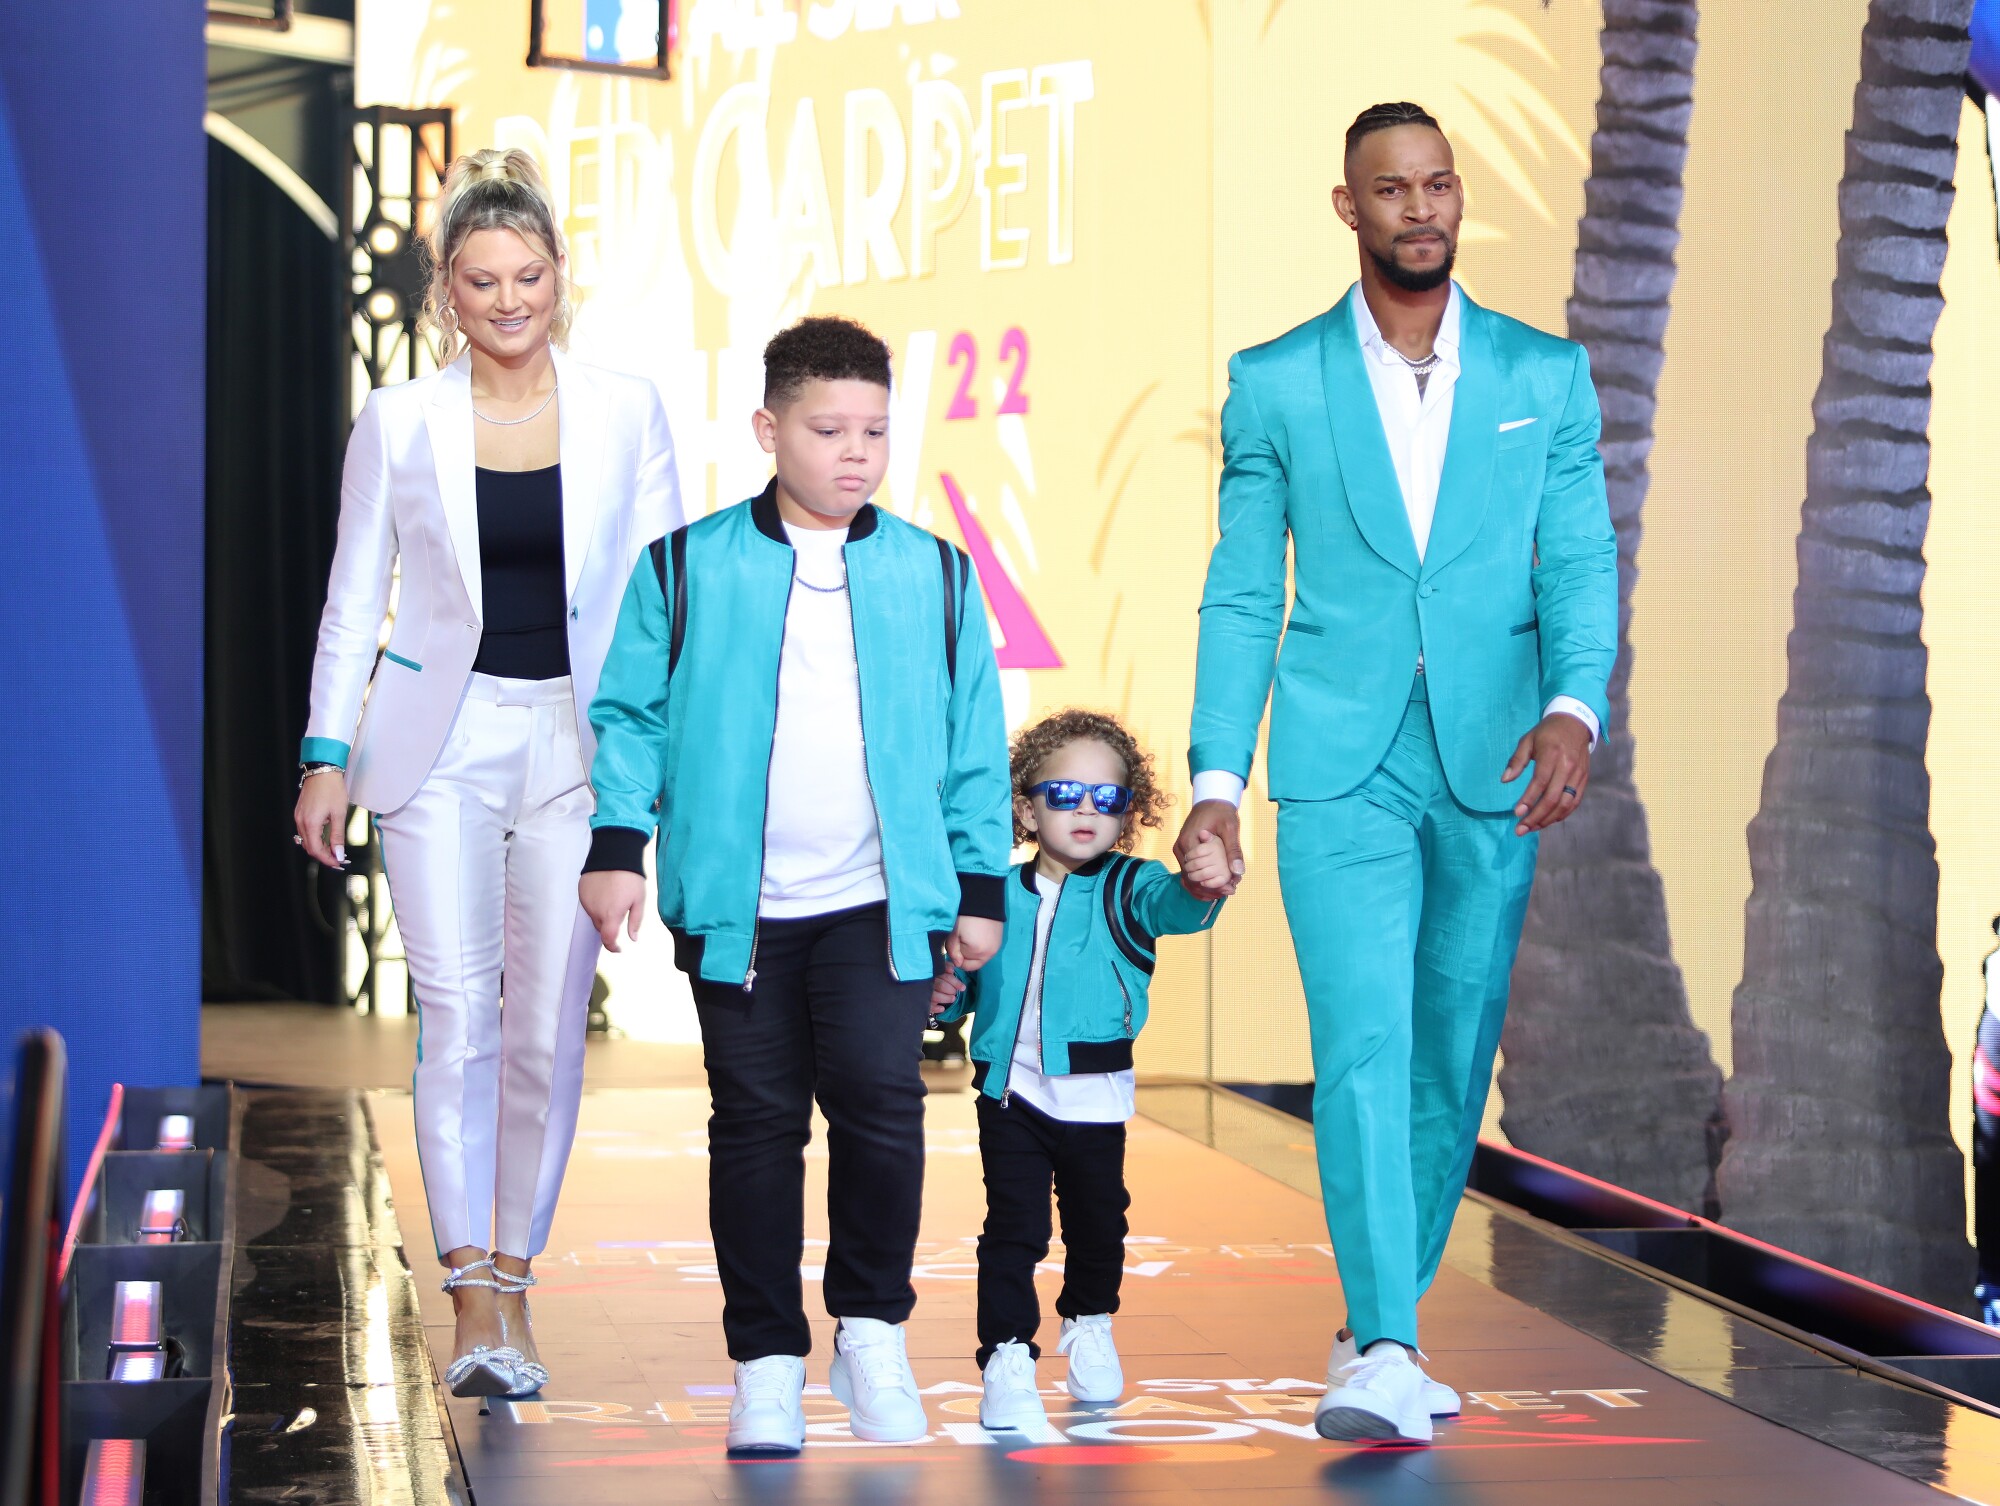 Minnesota Twins center fielder Byron Buxton and his family arrive on the red carpet for the 2022 MLB All-Star Game.